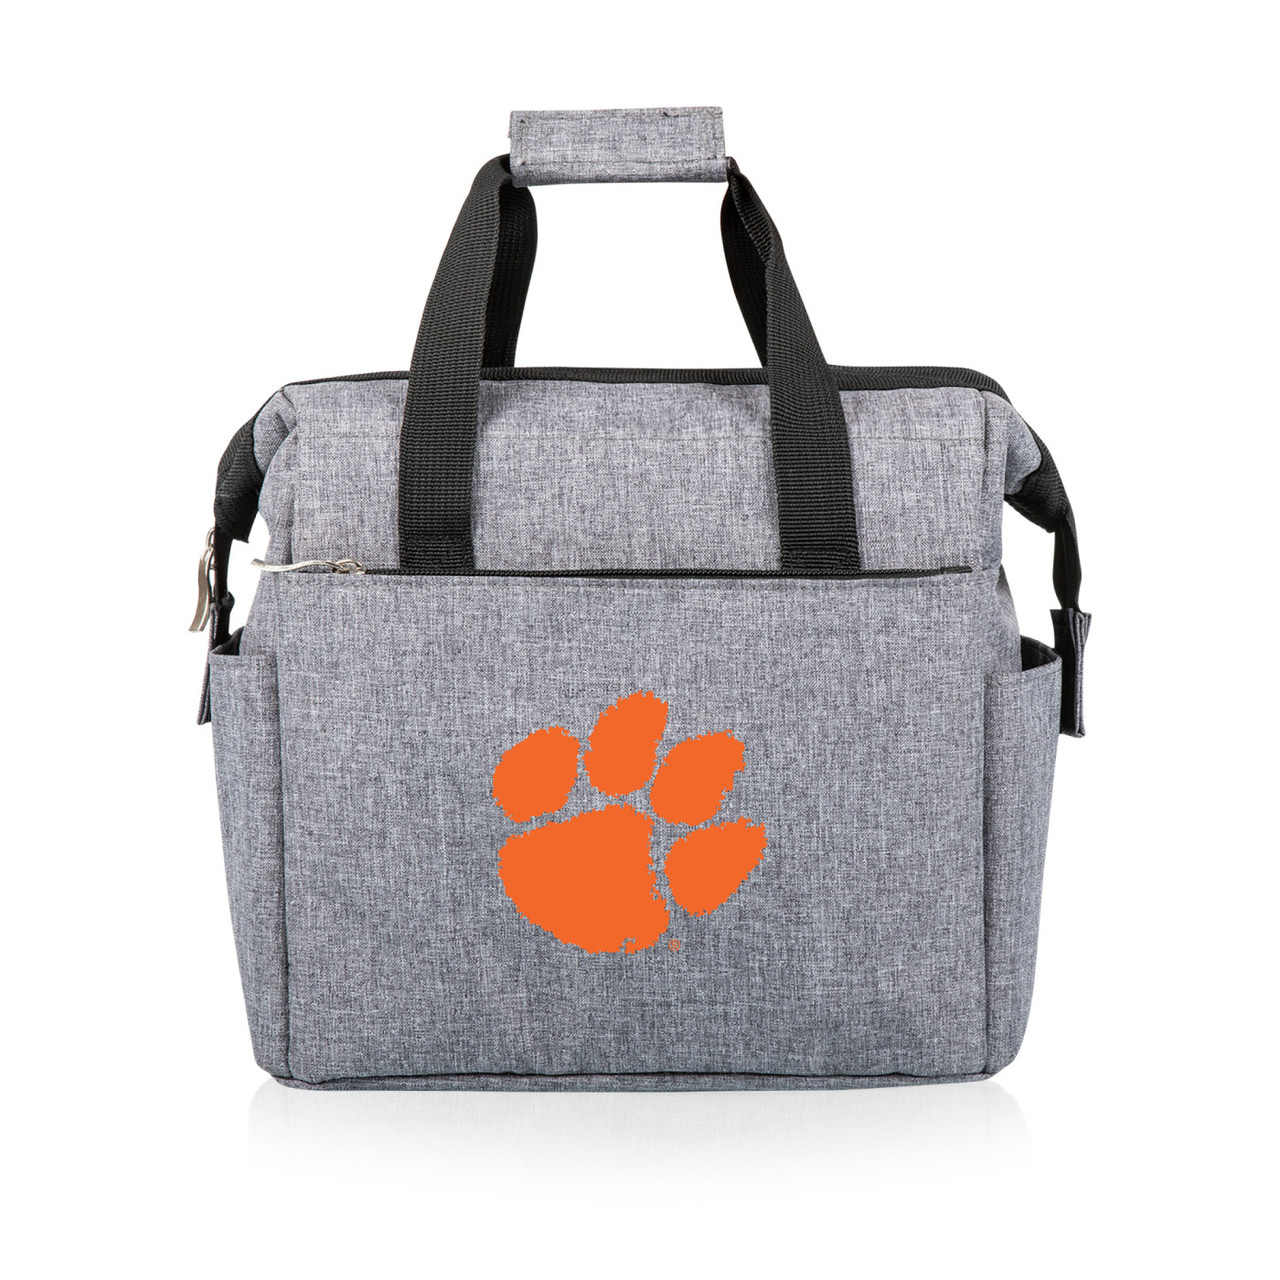 https://cdn11.bigcommerce.com/s-qq5h9nclzt/images/stencil/1280x1280/products/553150/224718/clemson-tigers-on-the-go-lunch-cooler_mainProductImage_Full__50104.1697224022.jpg?c=1